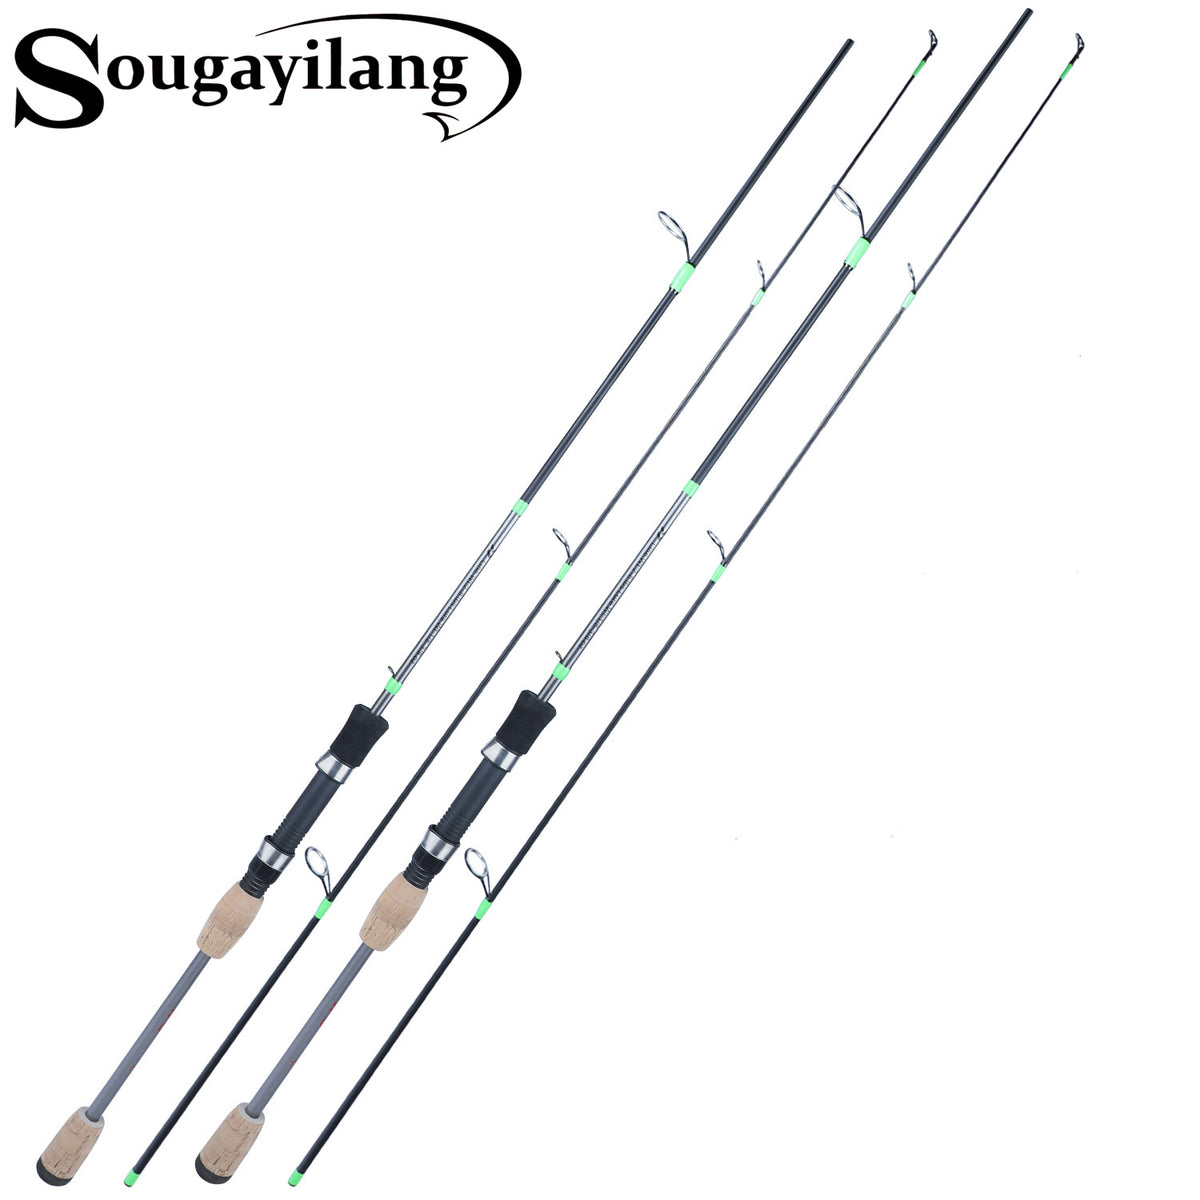 Sougayilang Fishing Rods Graphite Lightweight Ultra Light Trout Rods 2  Pieces Cork Handle Crappie Spinning Fishing Rod